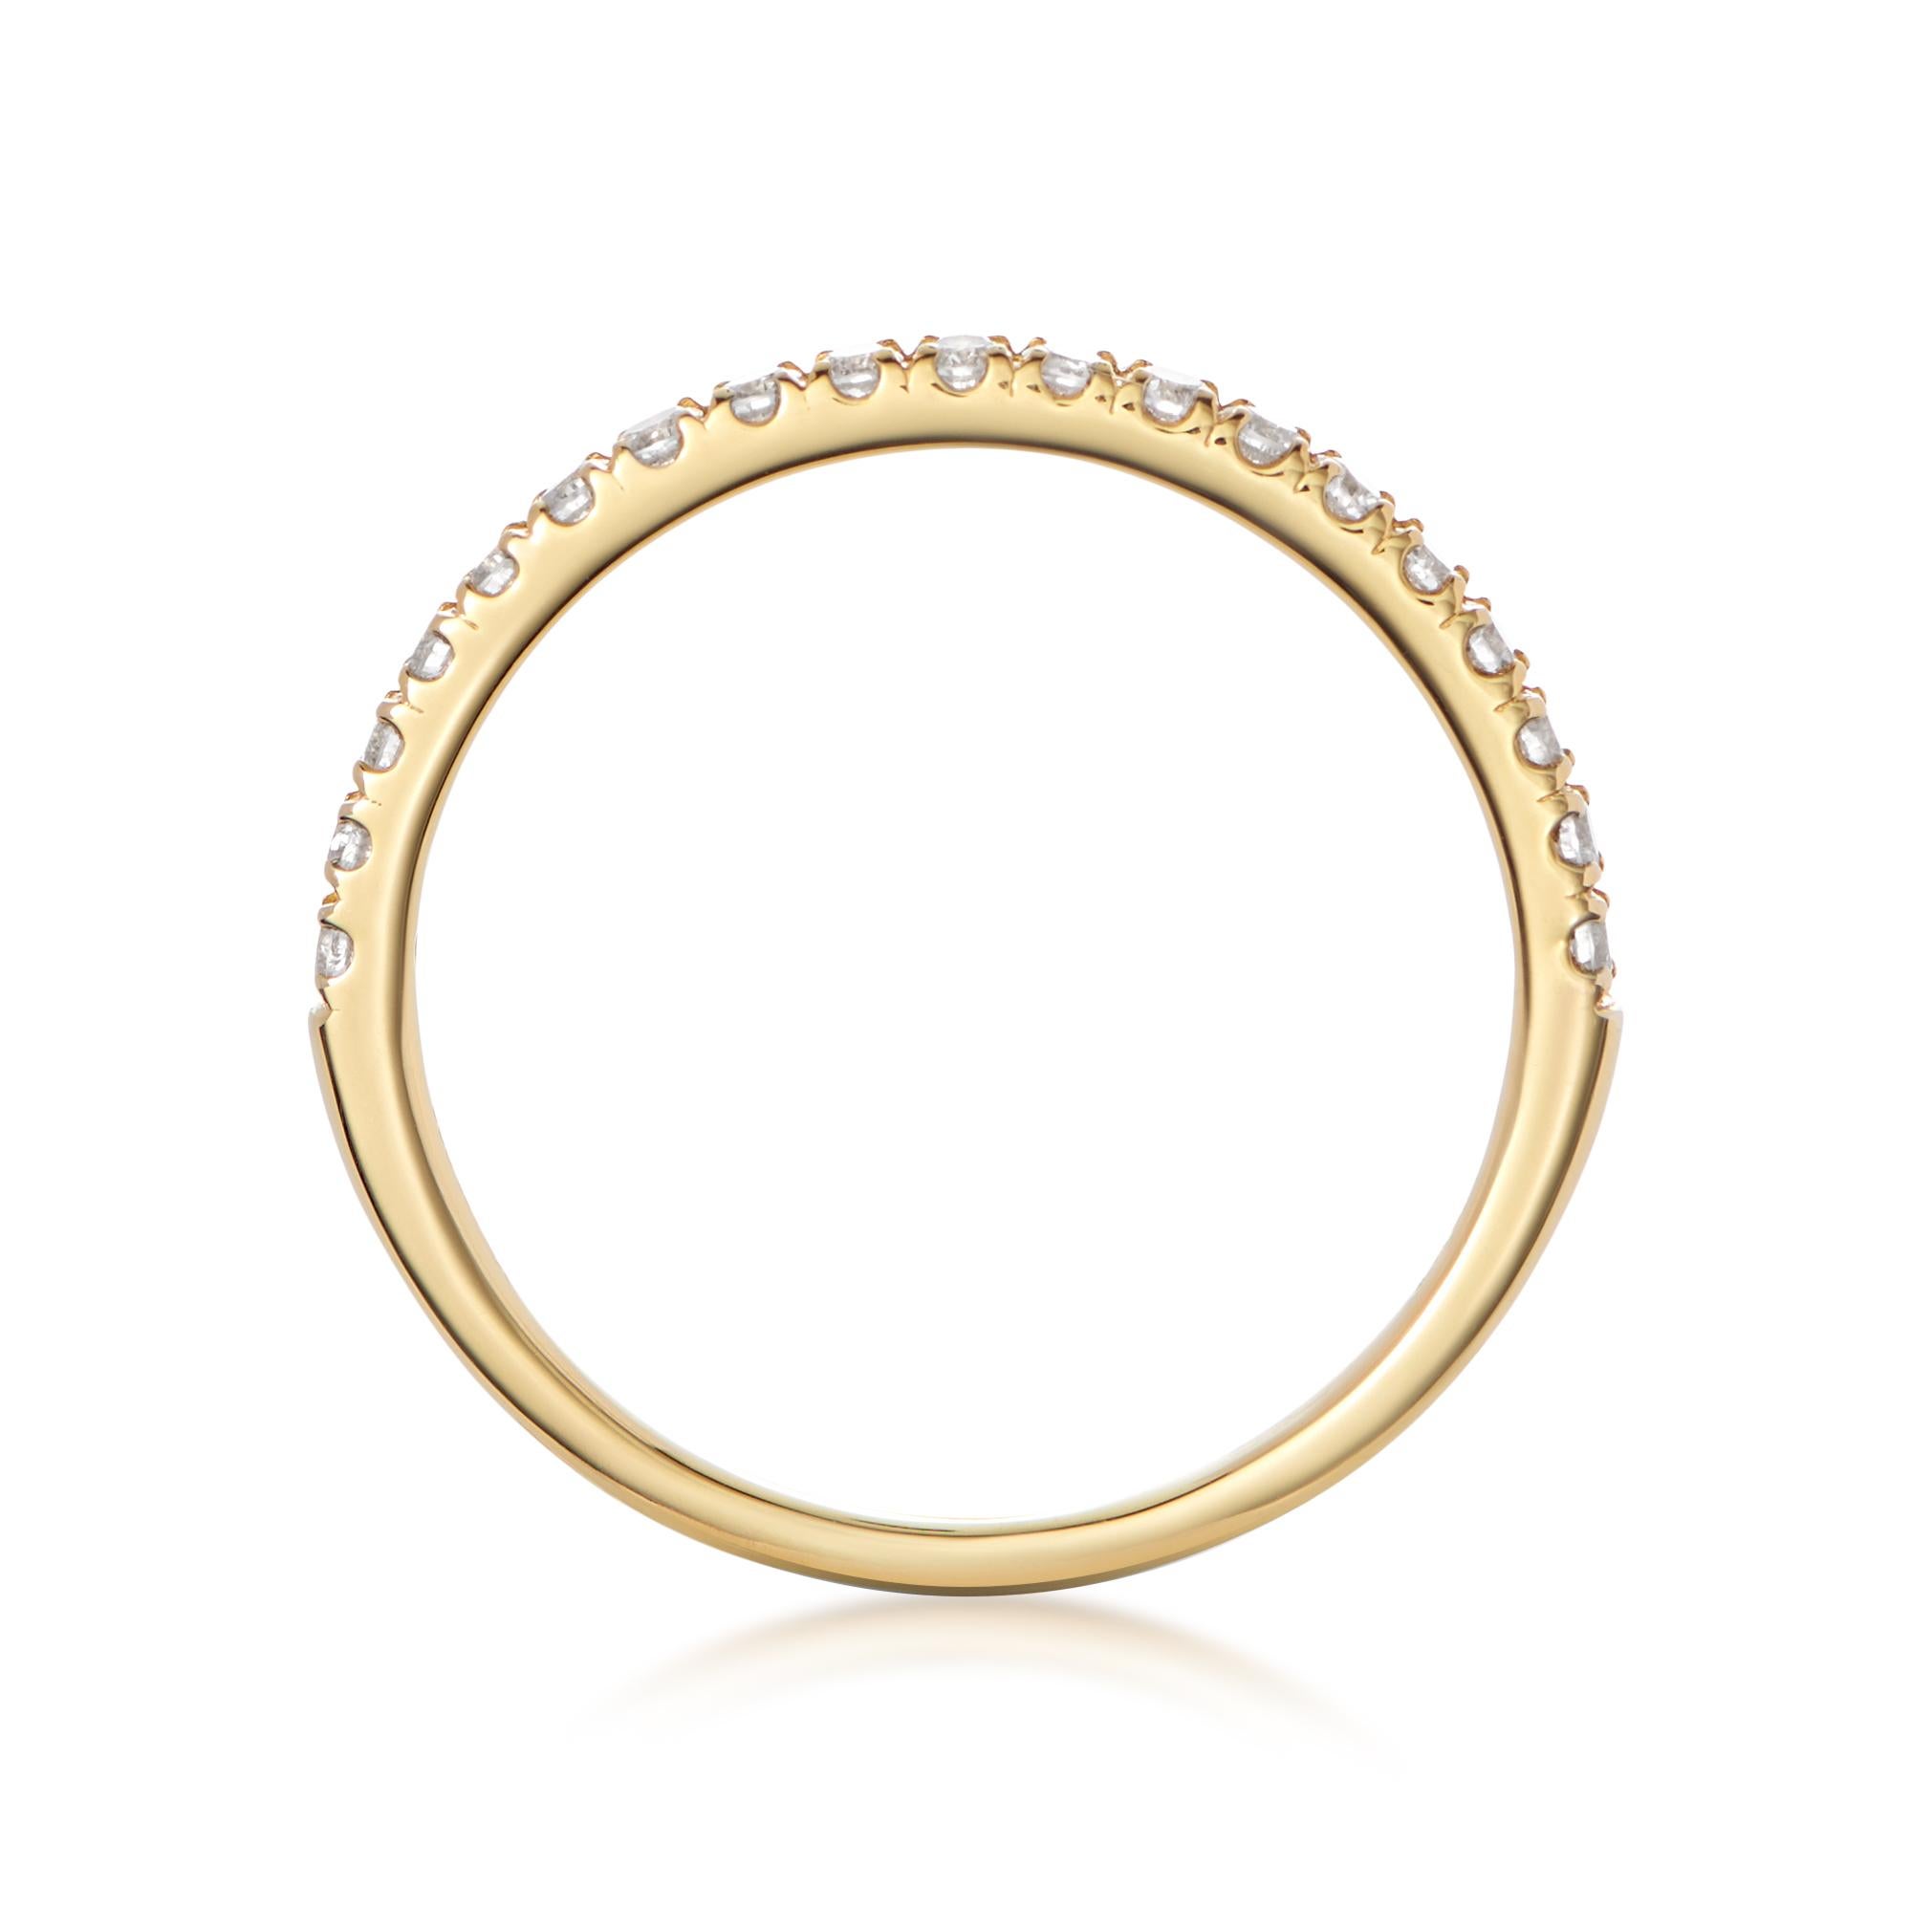 Fine gold band 1/2 set with white diamonds. Ideal for stacking or for a more delicate look, wear it on its own. Court shaped on inside for maximum comfort. Comes in rose gold, yellow gold and white gold. All 3 together look fabulous. 

- 18 karat